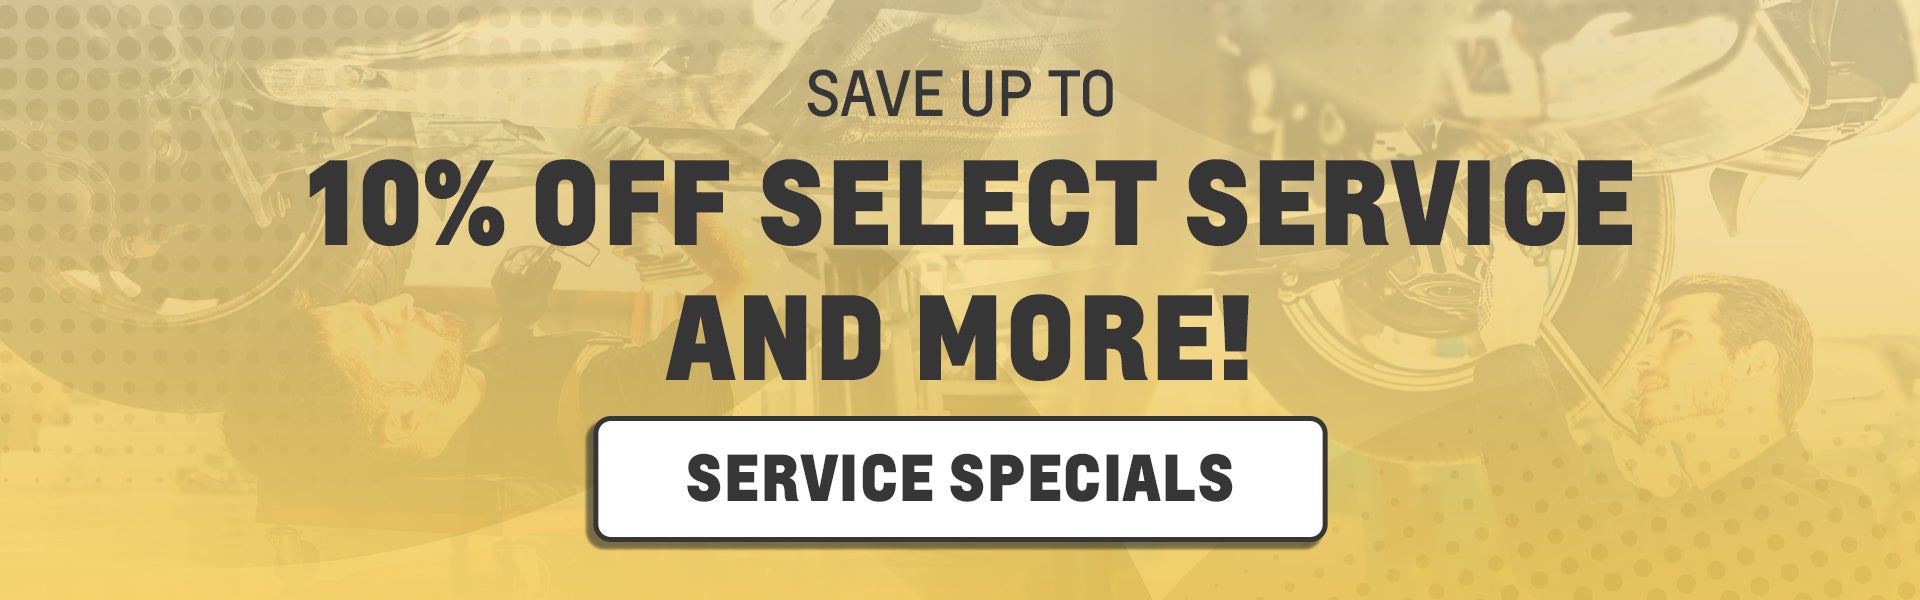 10% Off Select Service & More!